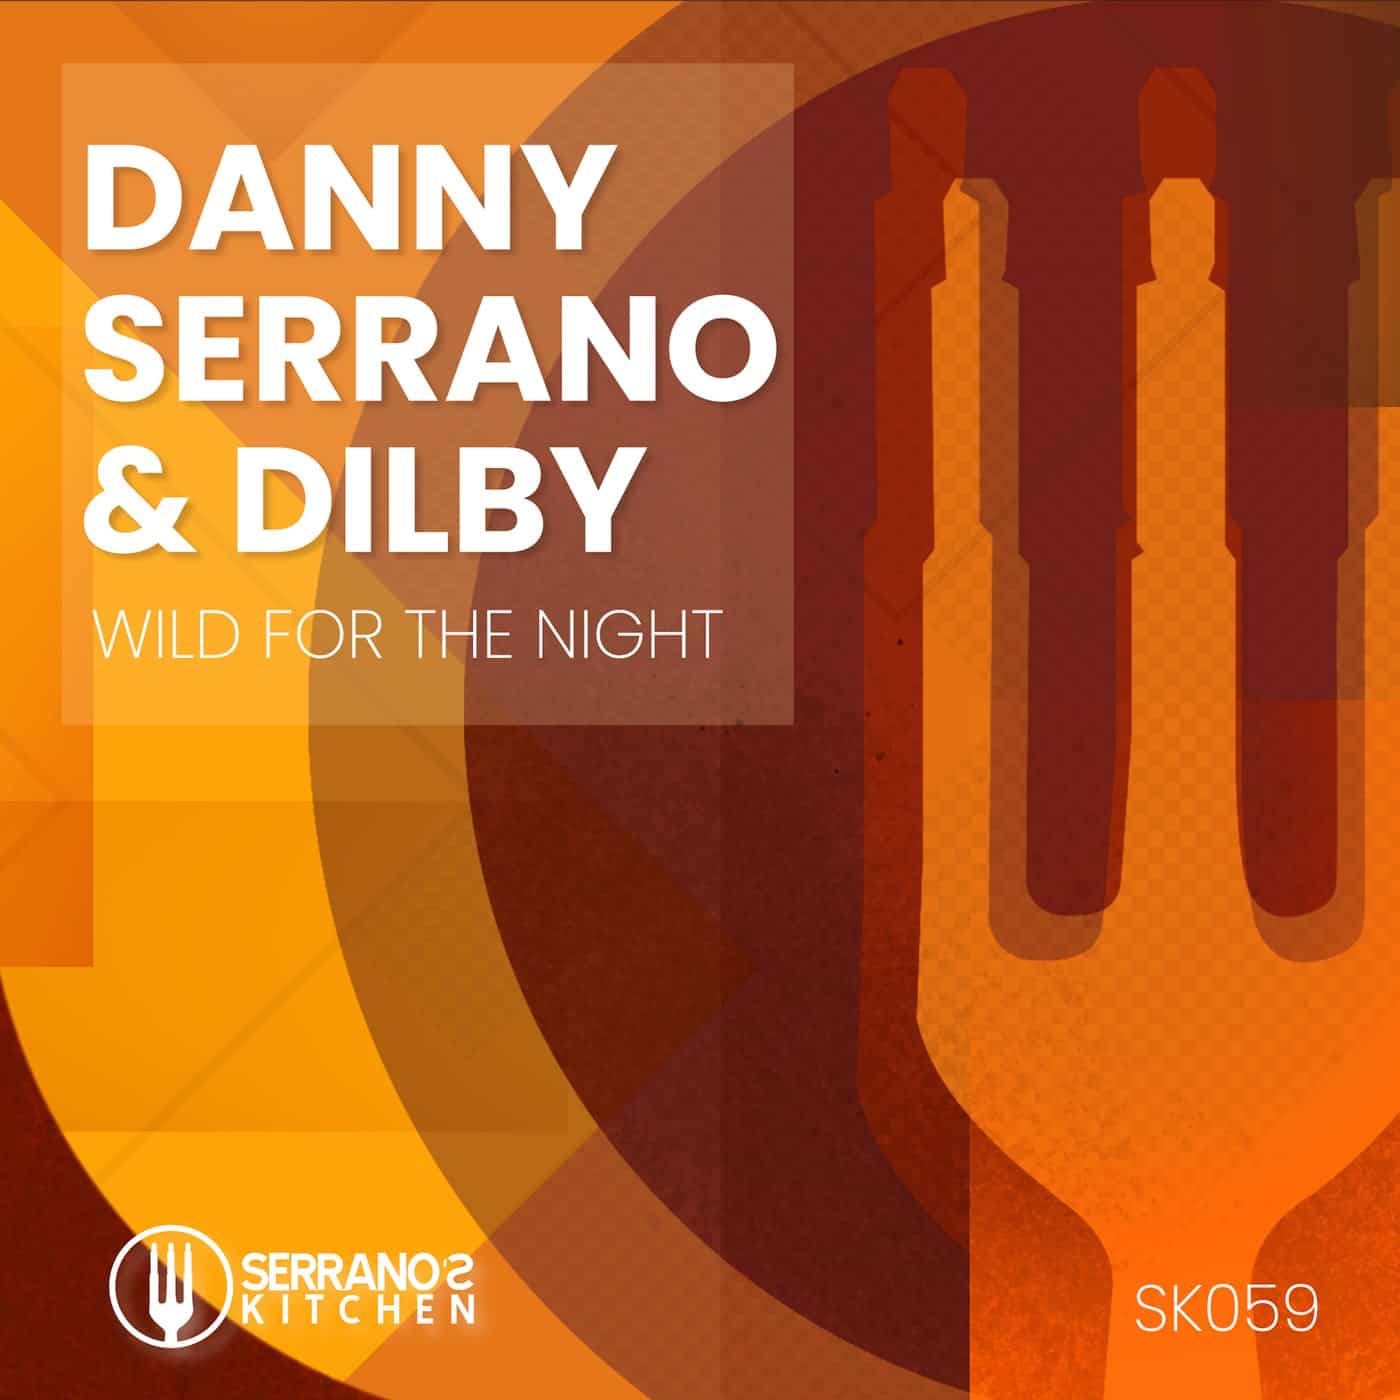 Download Danny Serrano, Dilby - Wild for the Night on Electrobuzz